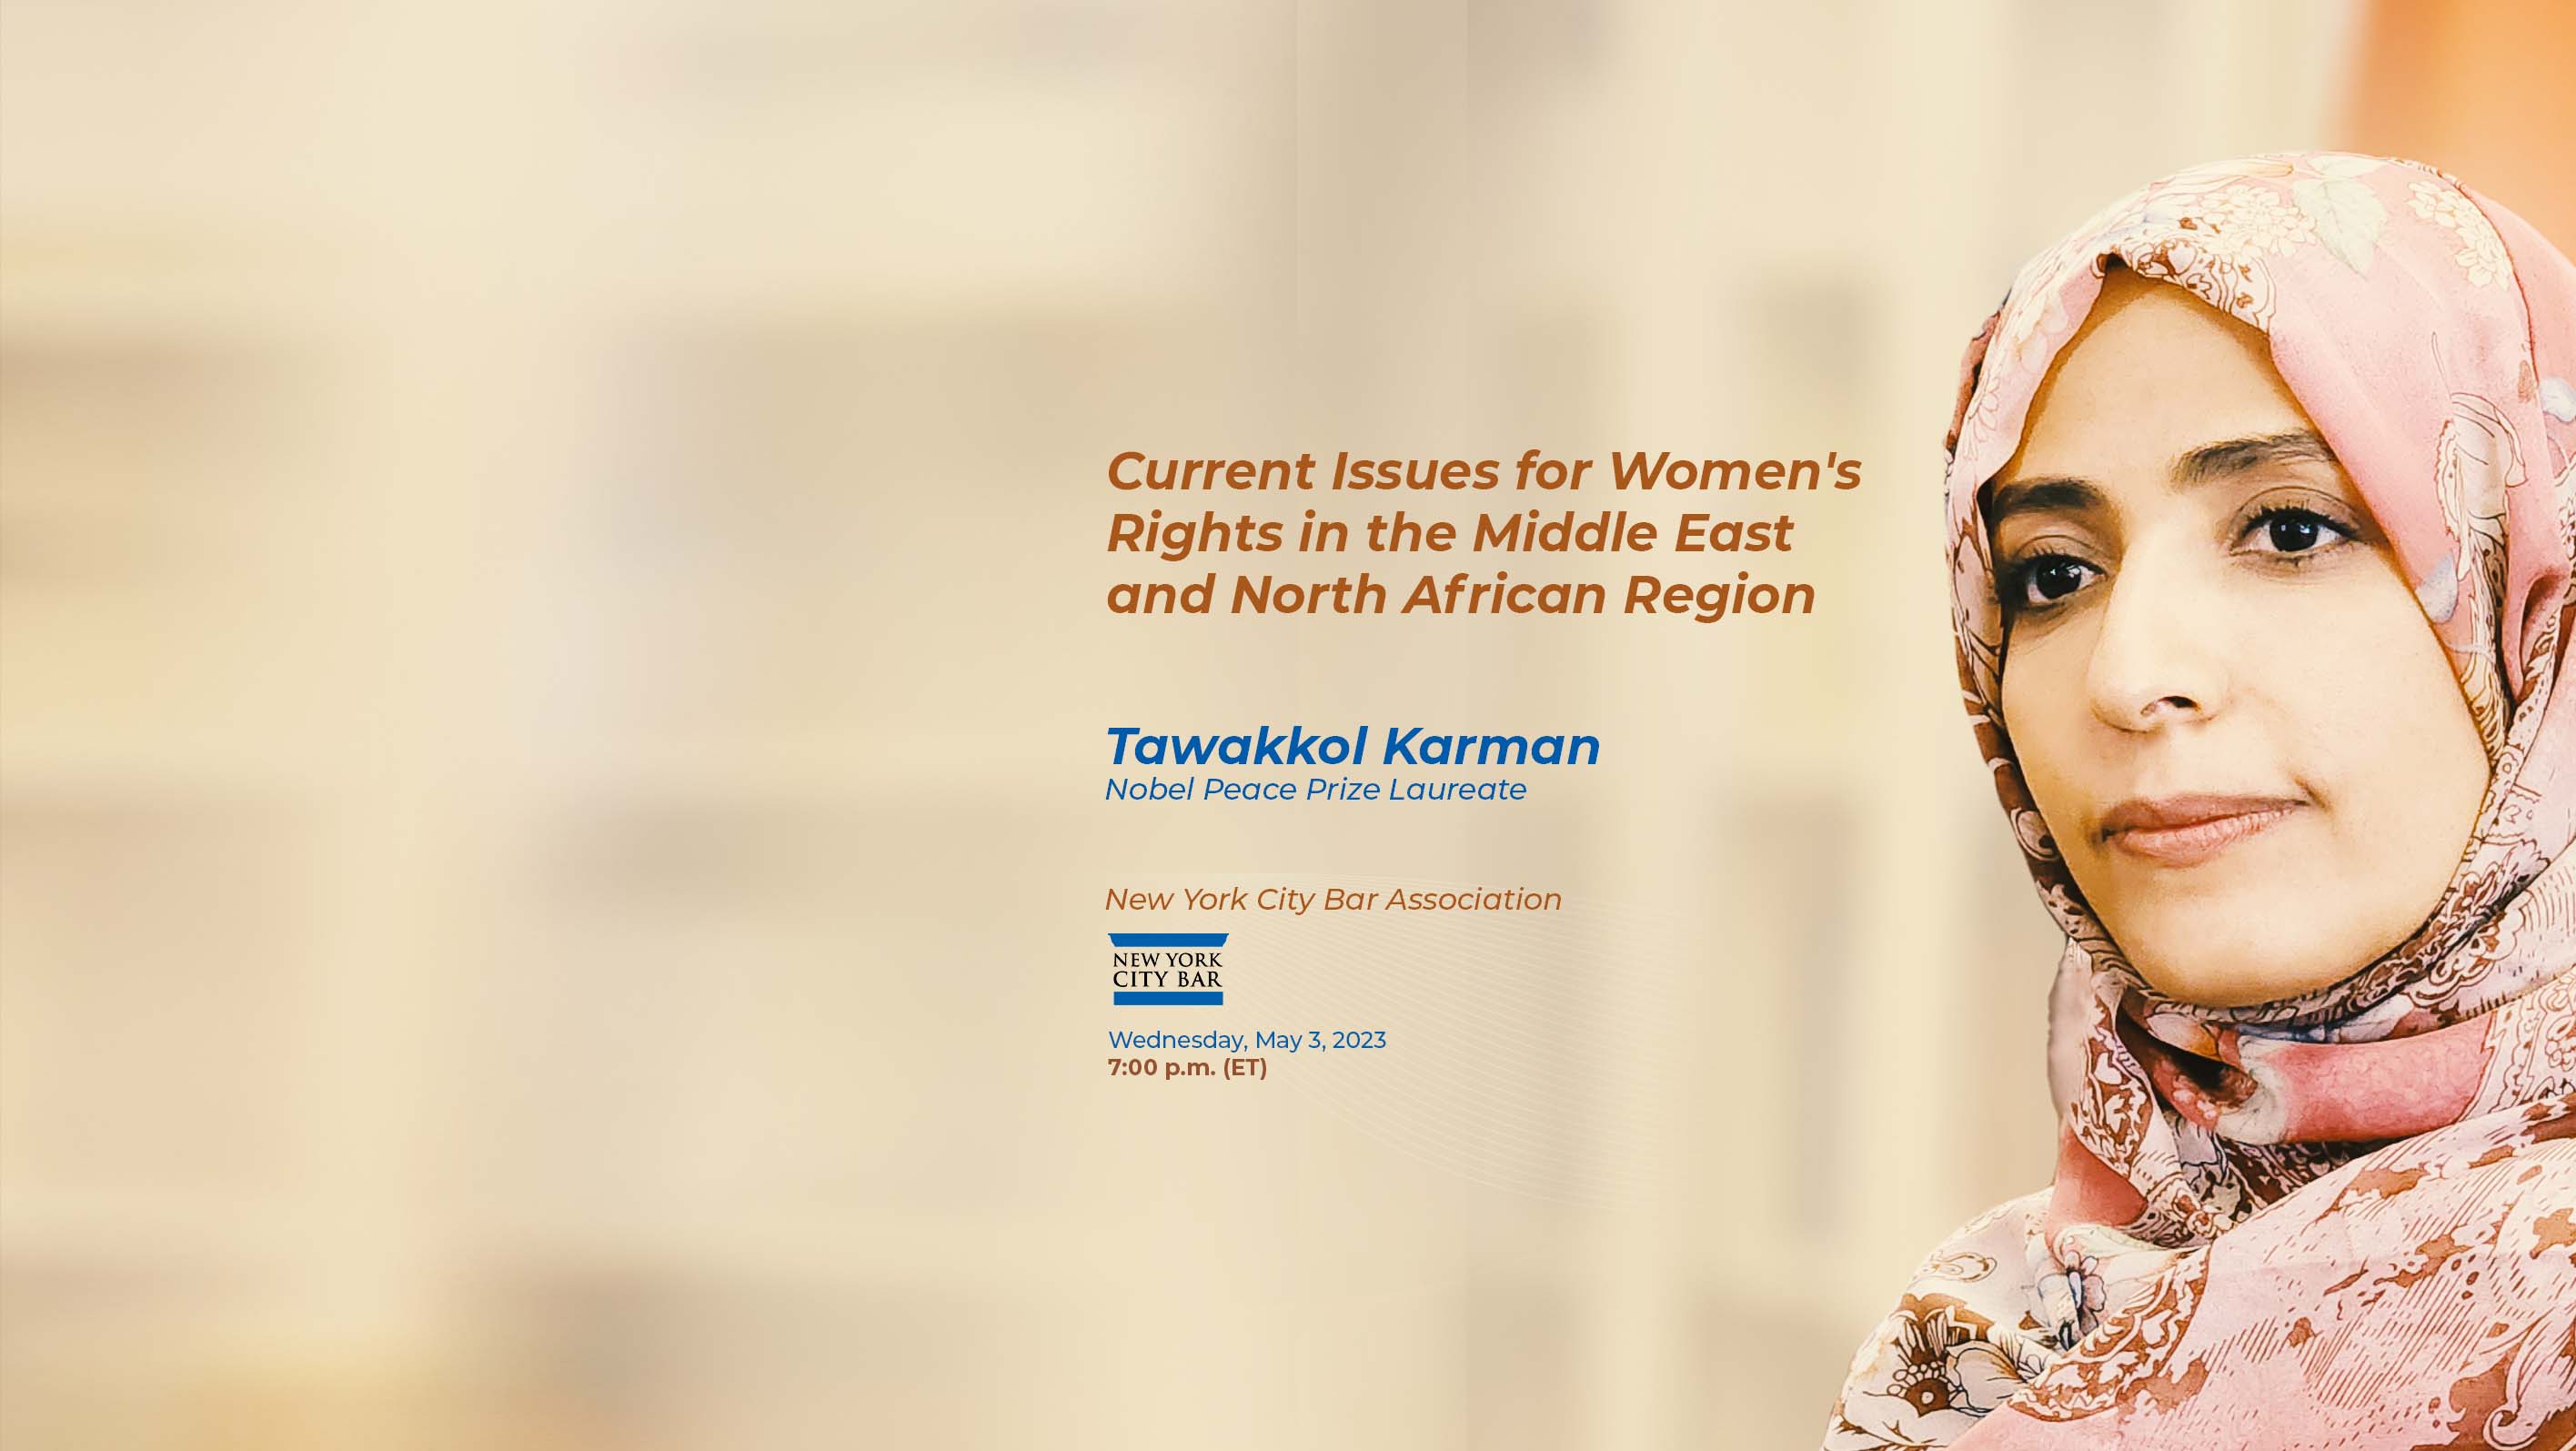 A call to action: Mrs. Karman heads discussion on advancing women's rights in MENA region